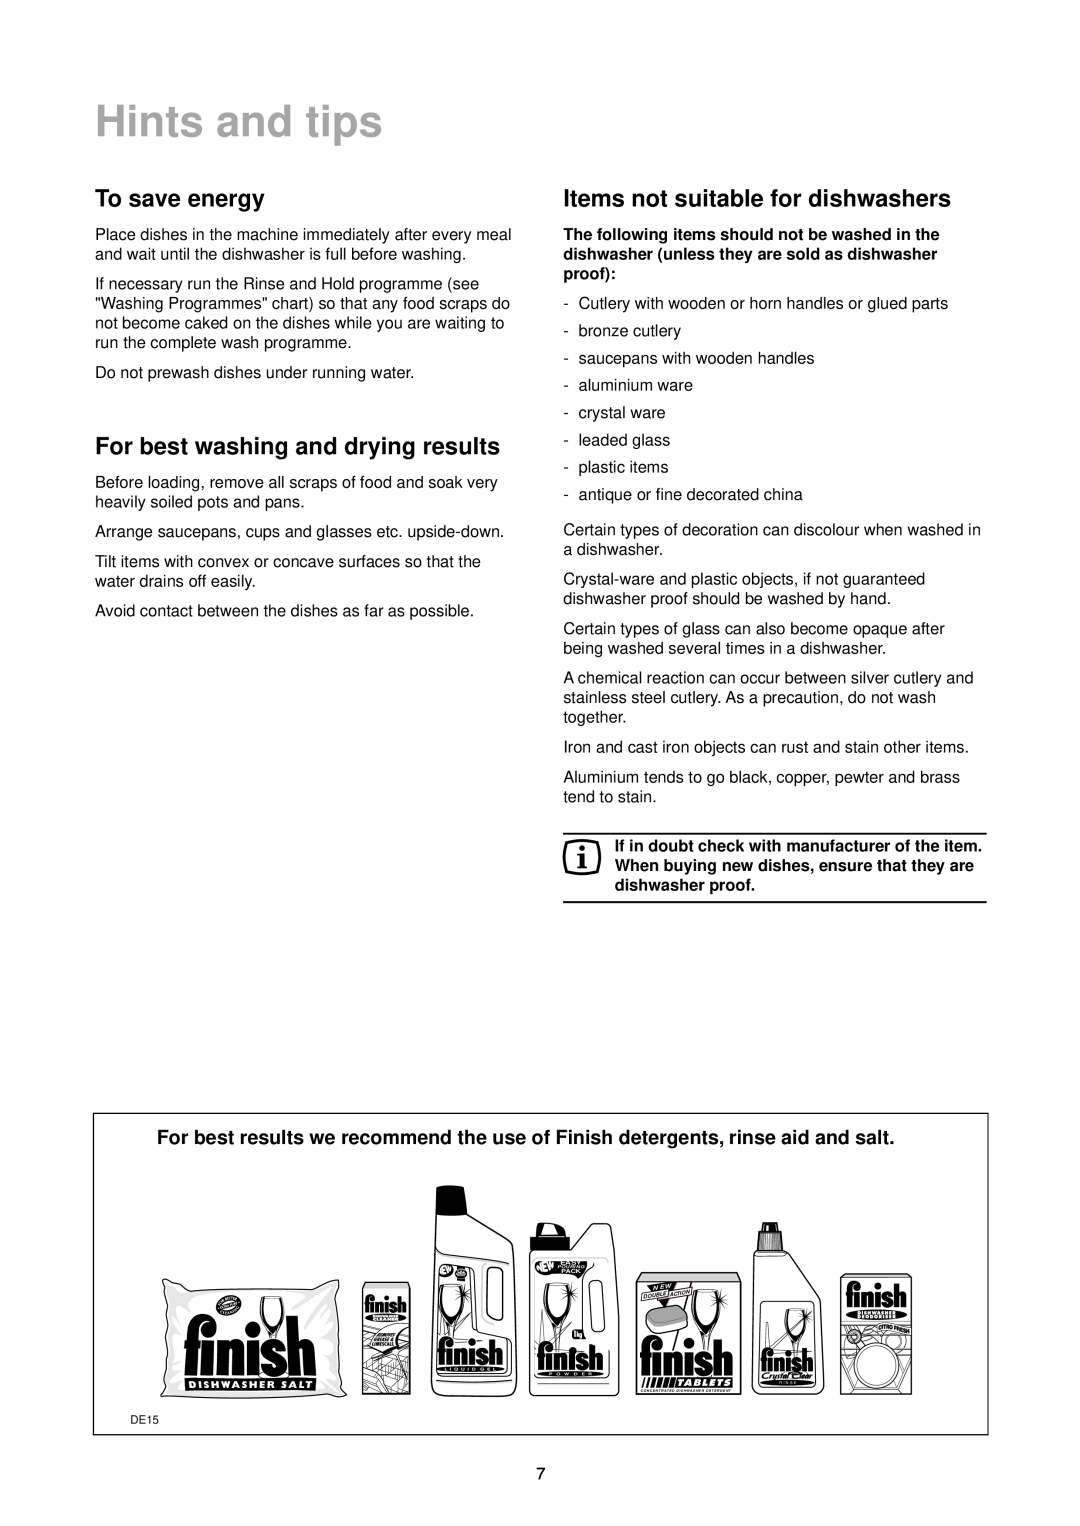 Zanussi ZT 6905 Hints and tips, To save energy, For best washing and drying results, Items not suitable for dishwashers 